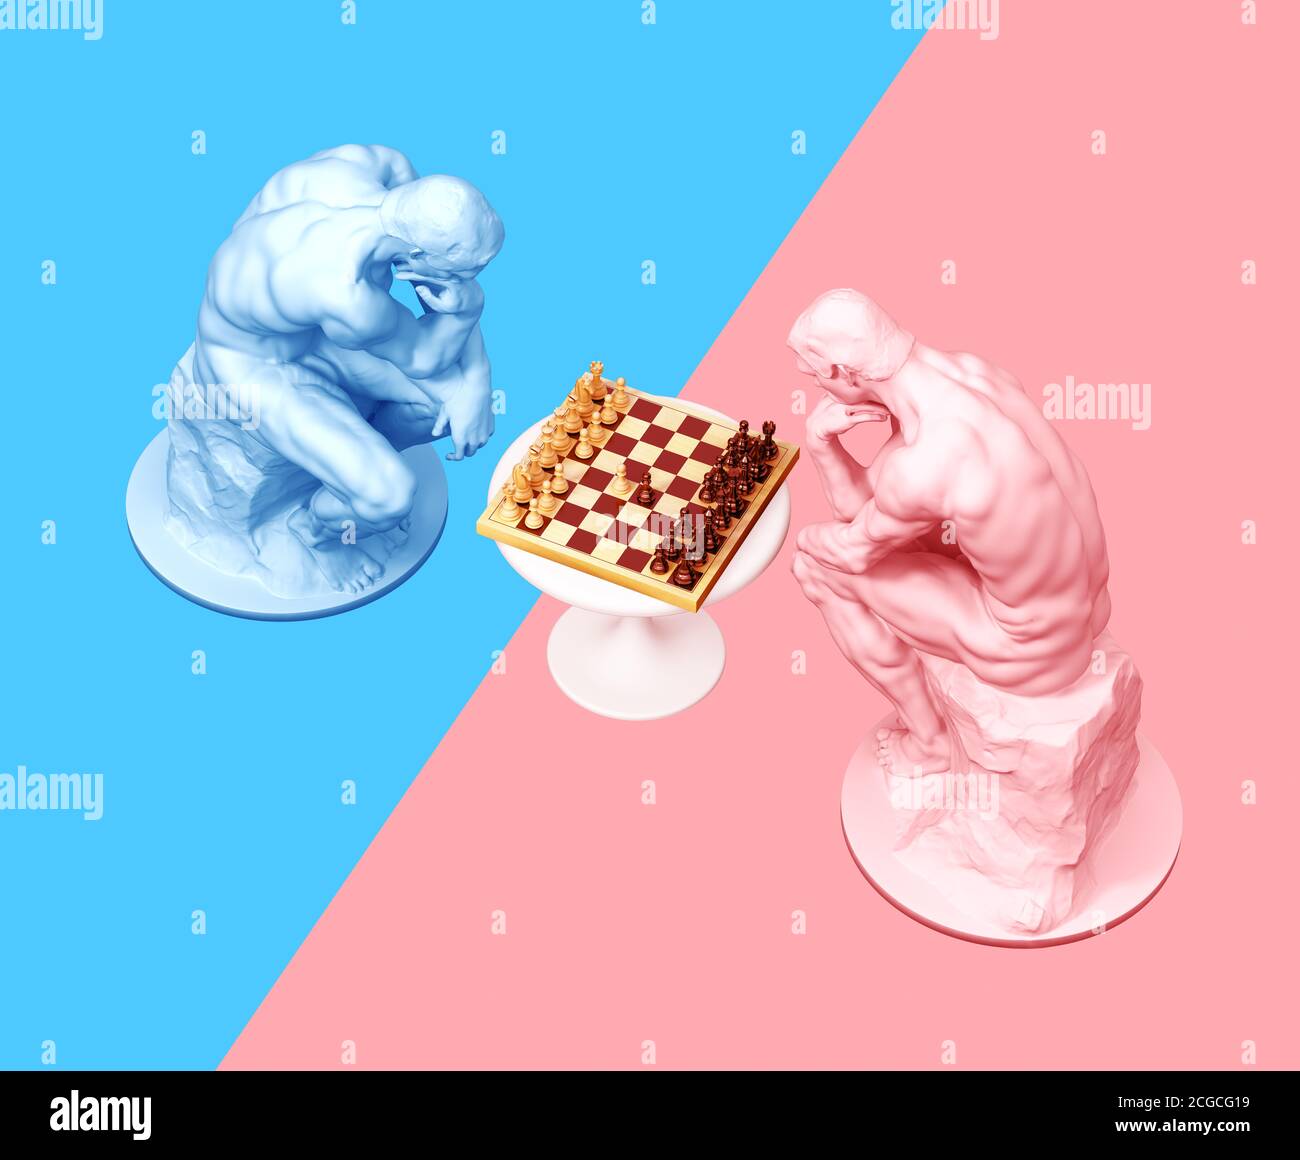 Two Thinkers Pondering The Chess Game On Blue And Pink Backgrounds Stock Photo